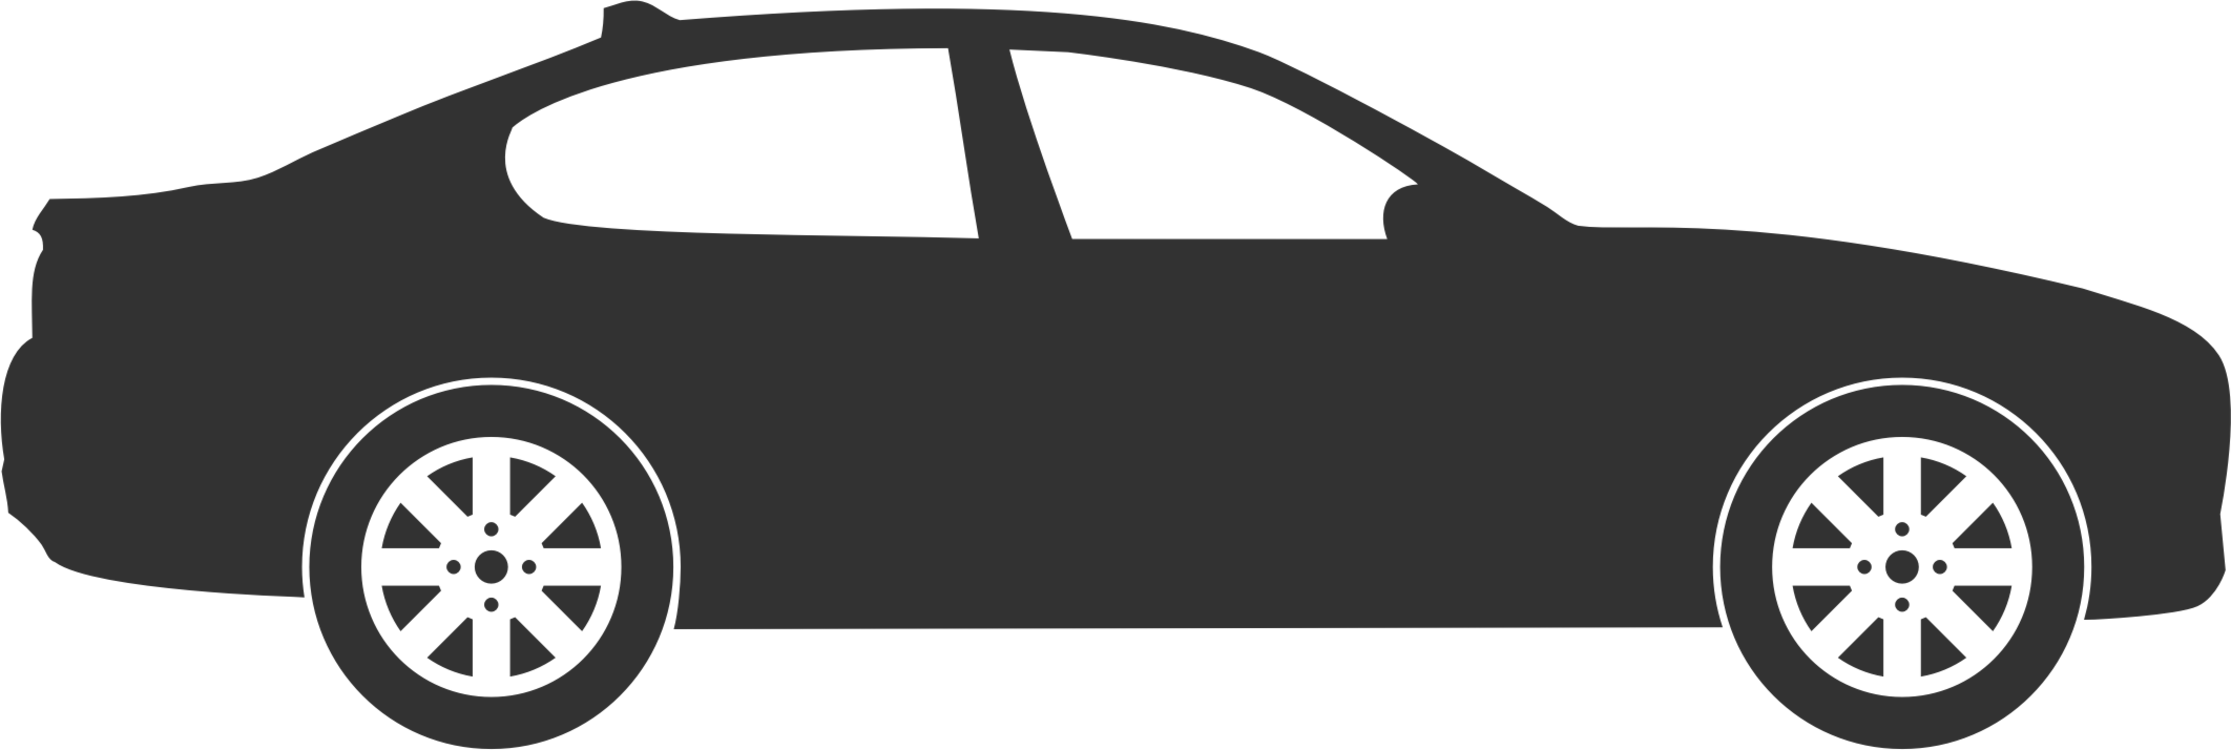 A Car Silhouette With A Black Background